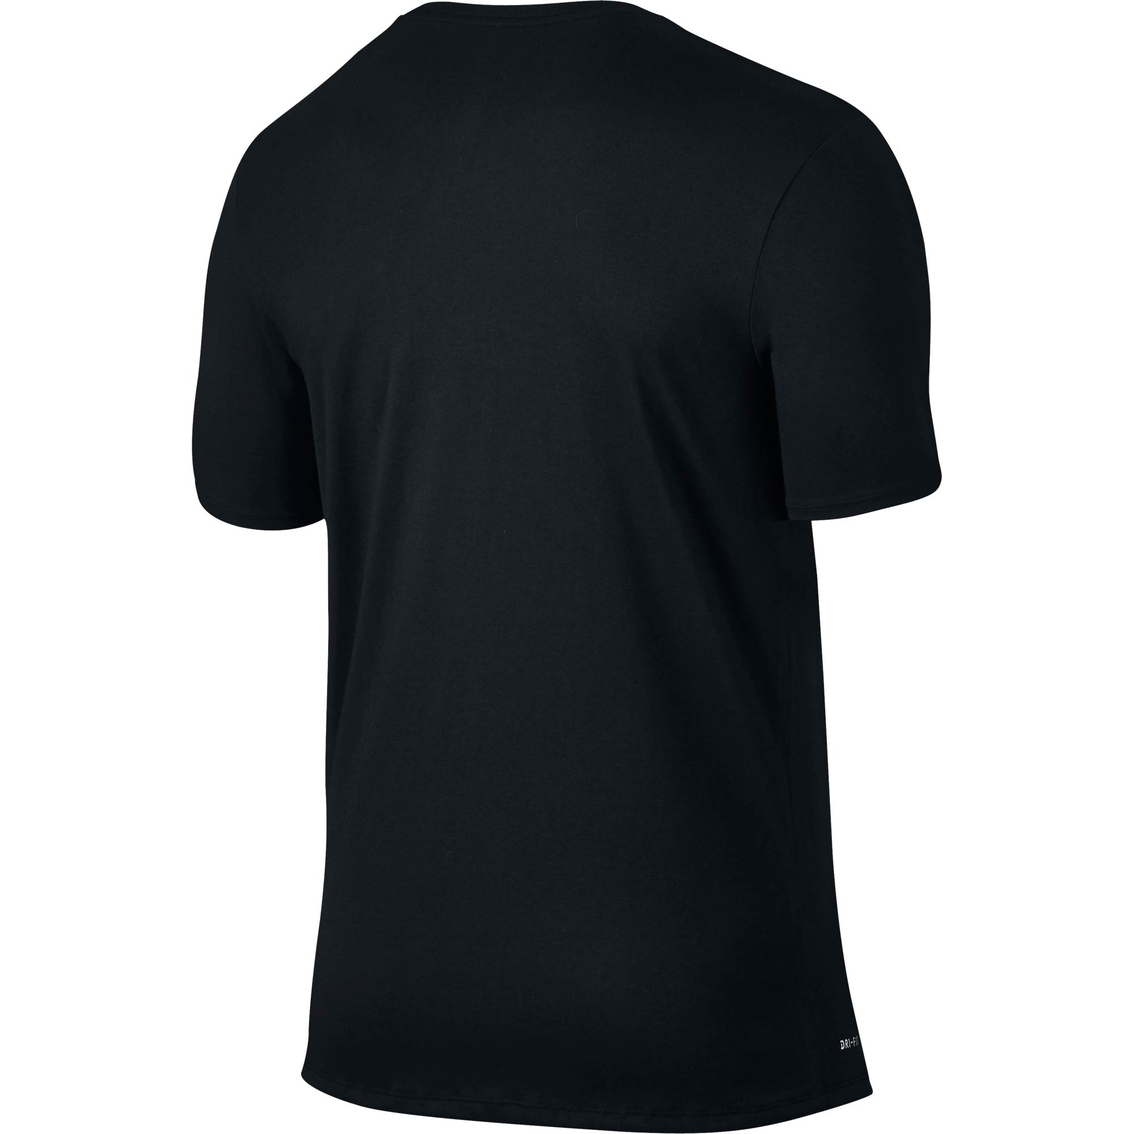 Nike Dri Fit Swoosh Tee | Shirts | Clothing & Accessories | Shop The ...